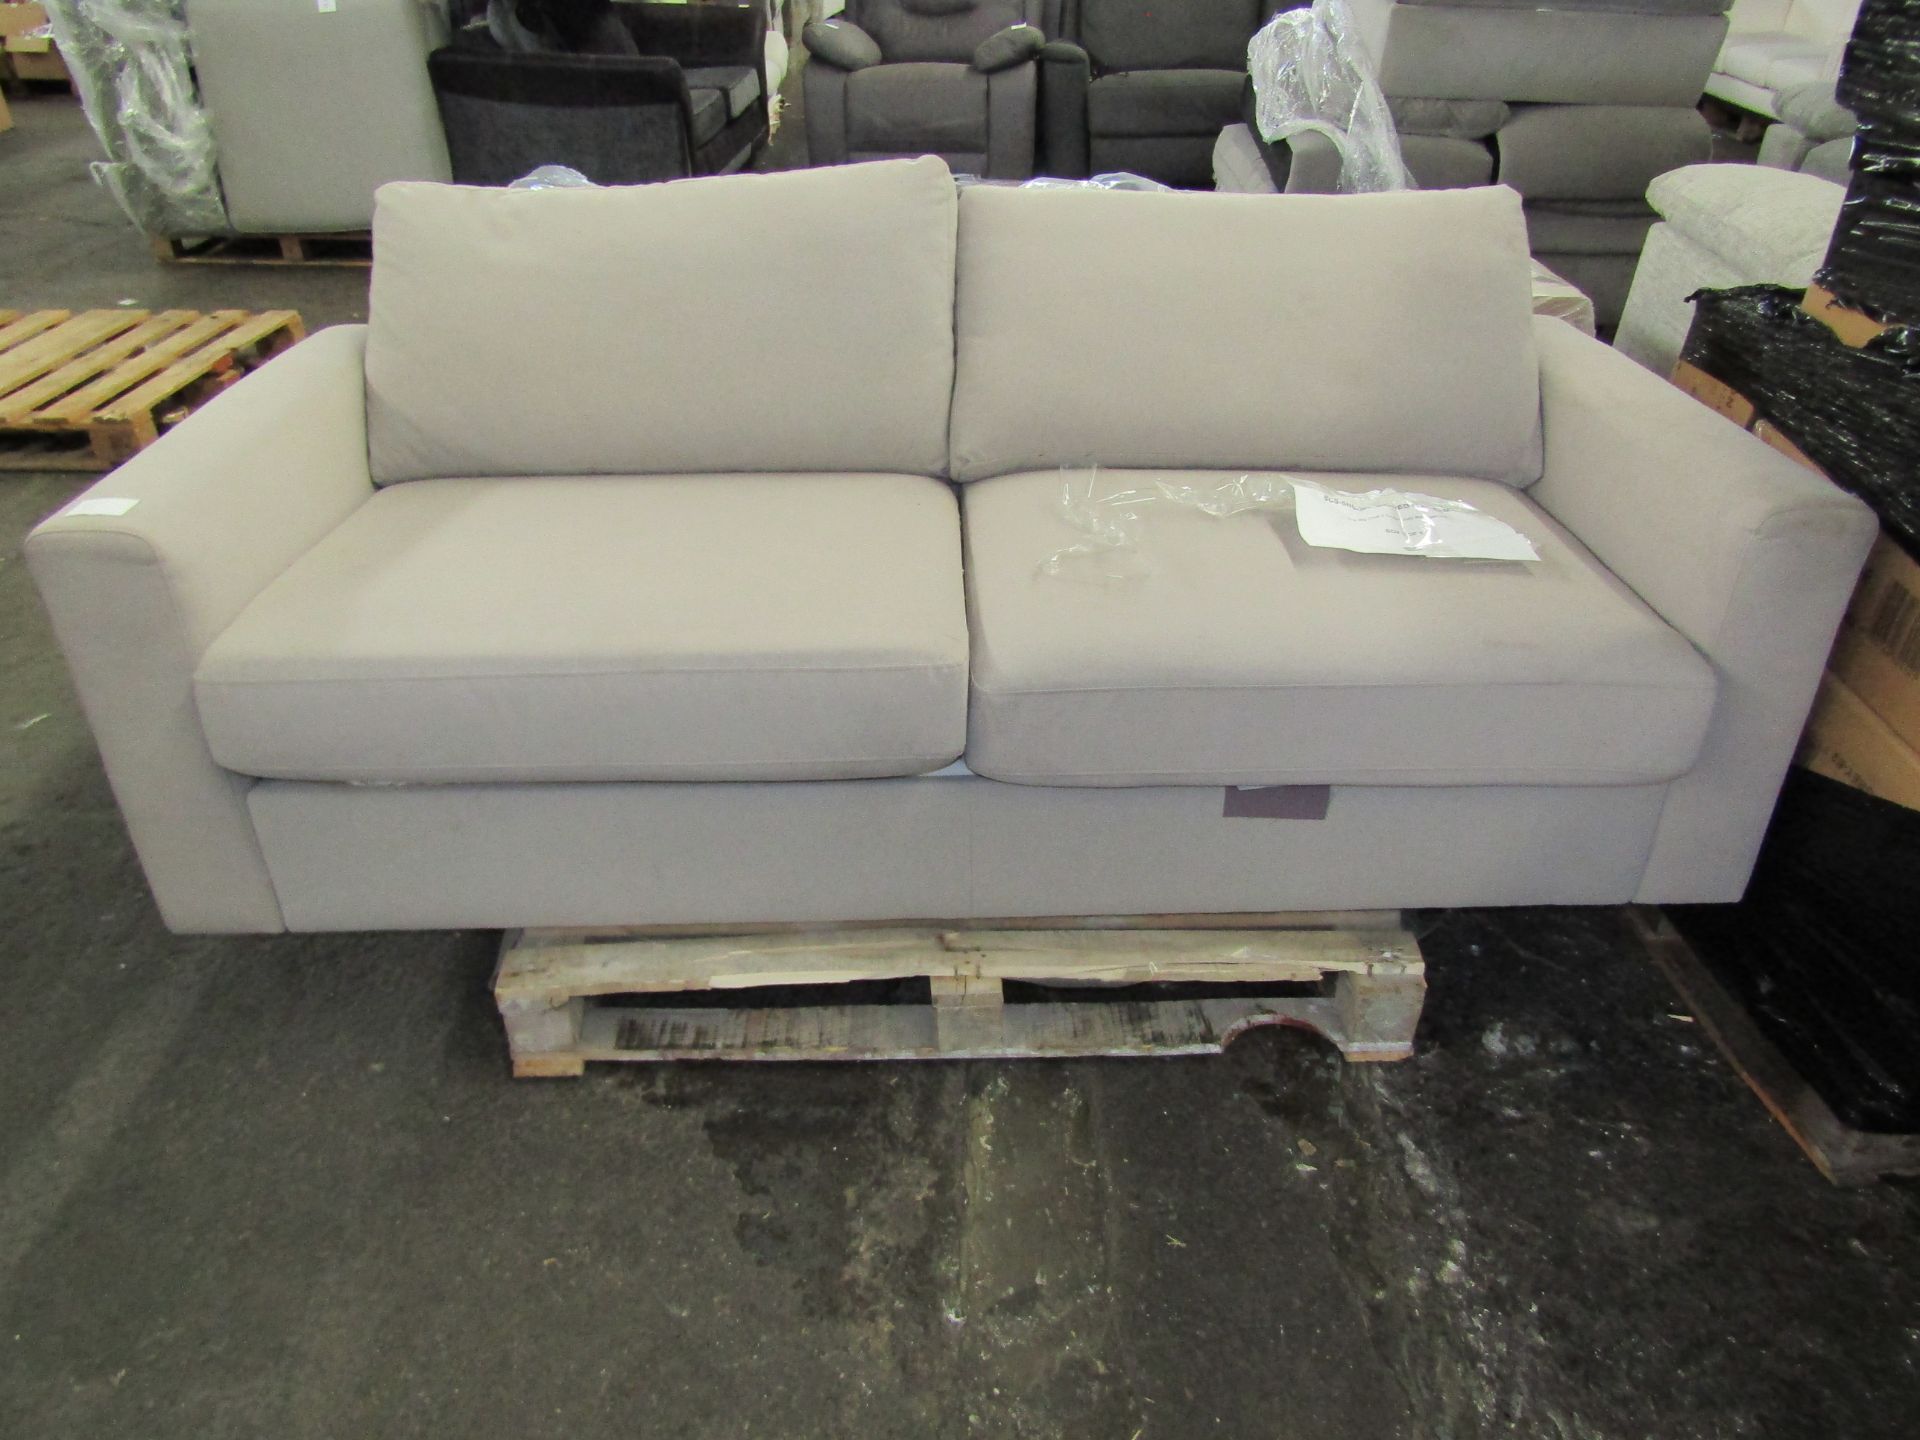 The Big Chill 3 Seater Sofa Bed Oatmeal RRP 2249 About the Product(s) The Big Chill 3 Seater Sofa